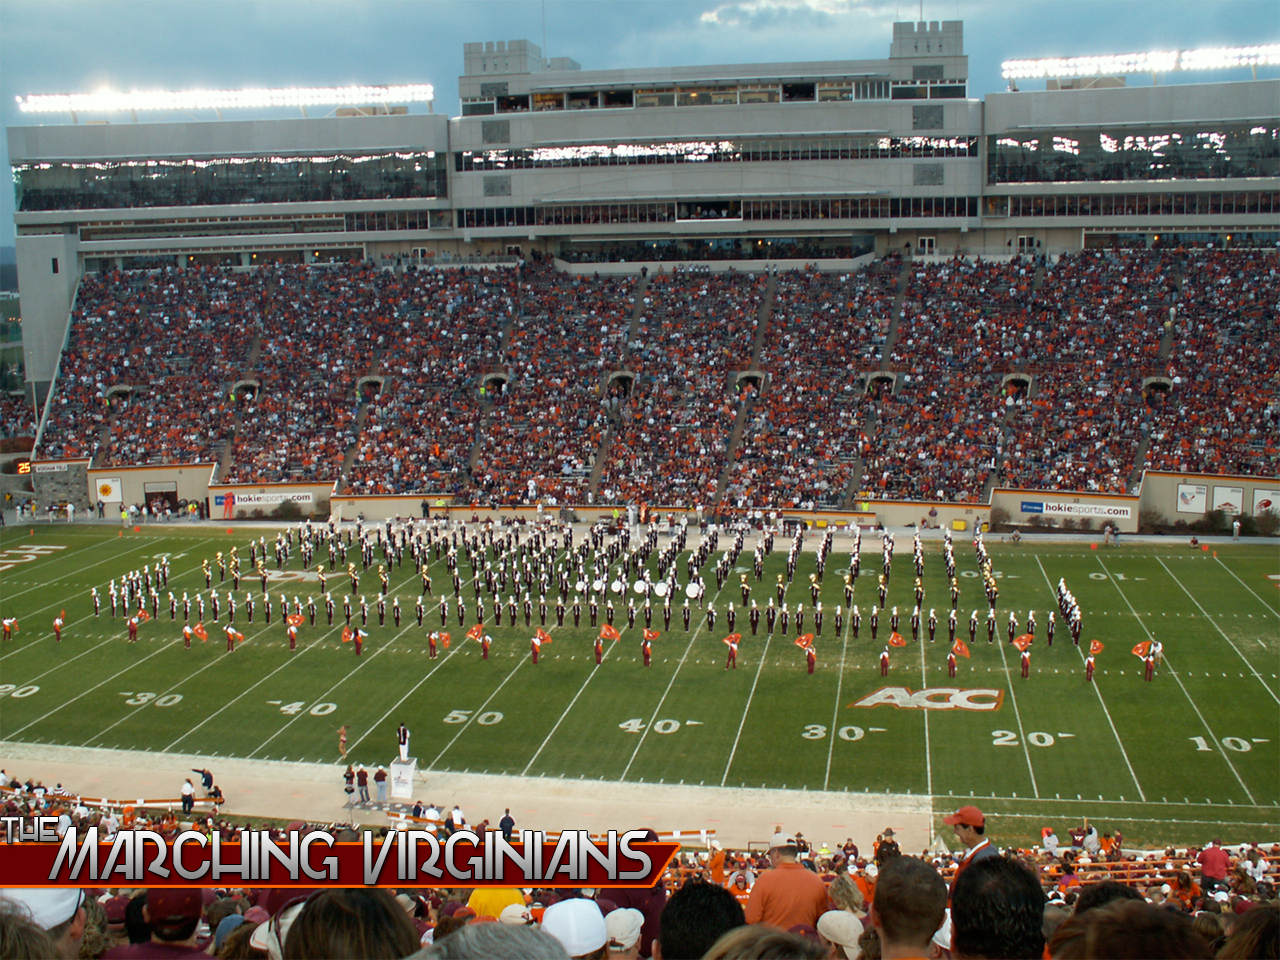 The Marching Virginians Virginia Tech Sights Sounds S